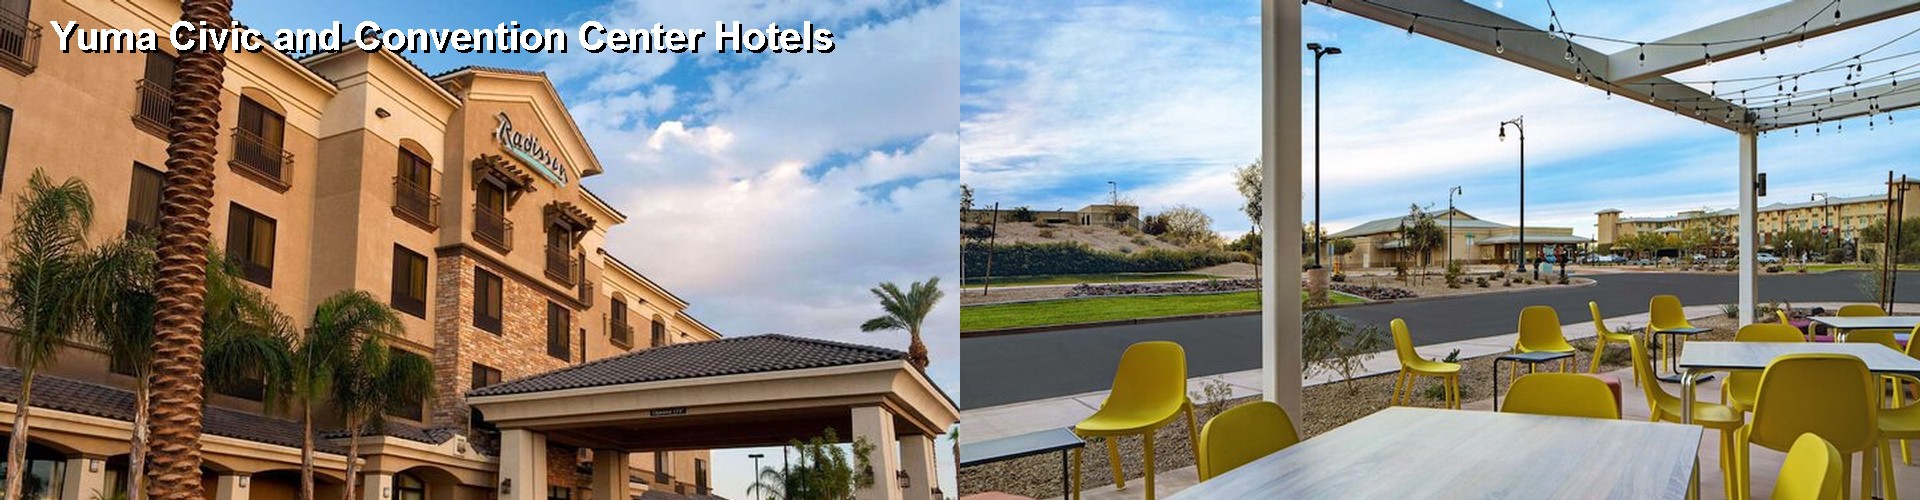 1 Best Hotels near Yuma Civic and Convention Center